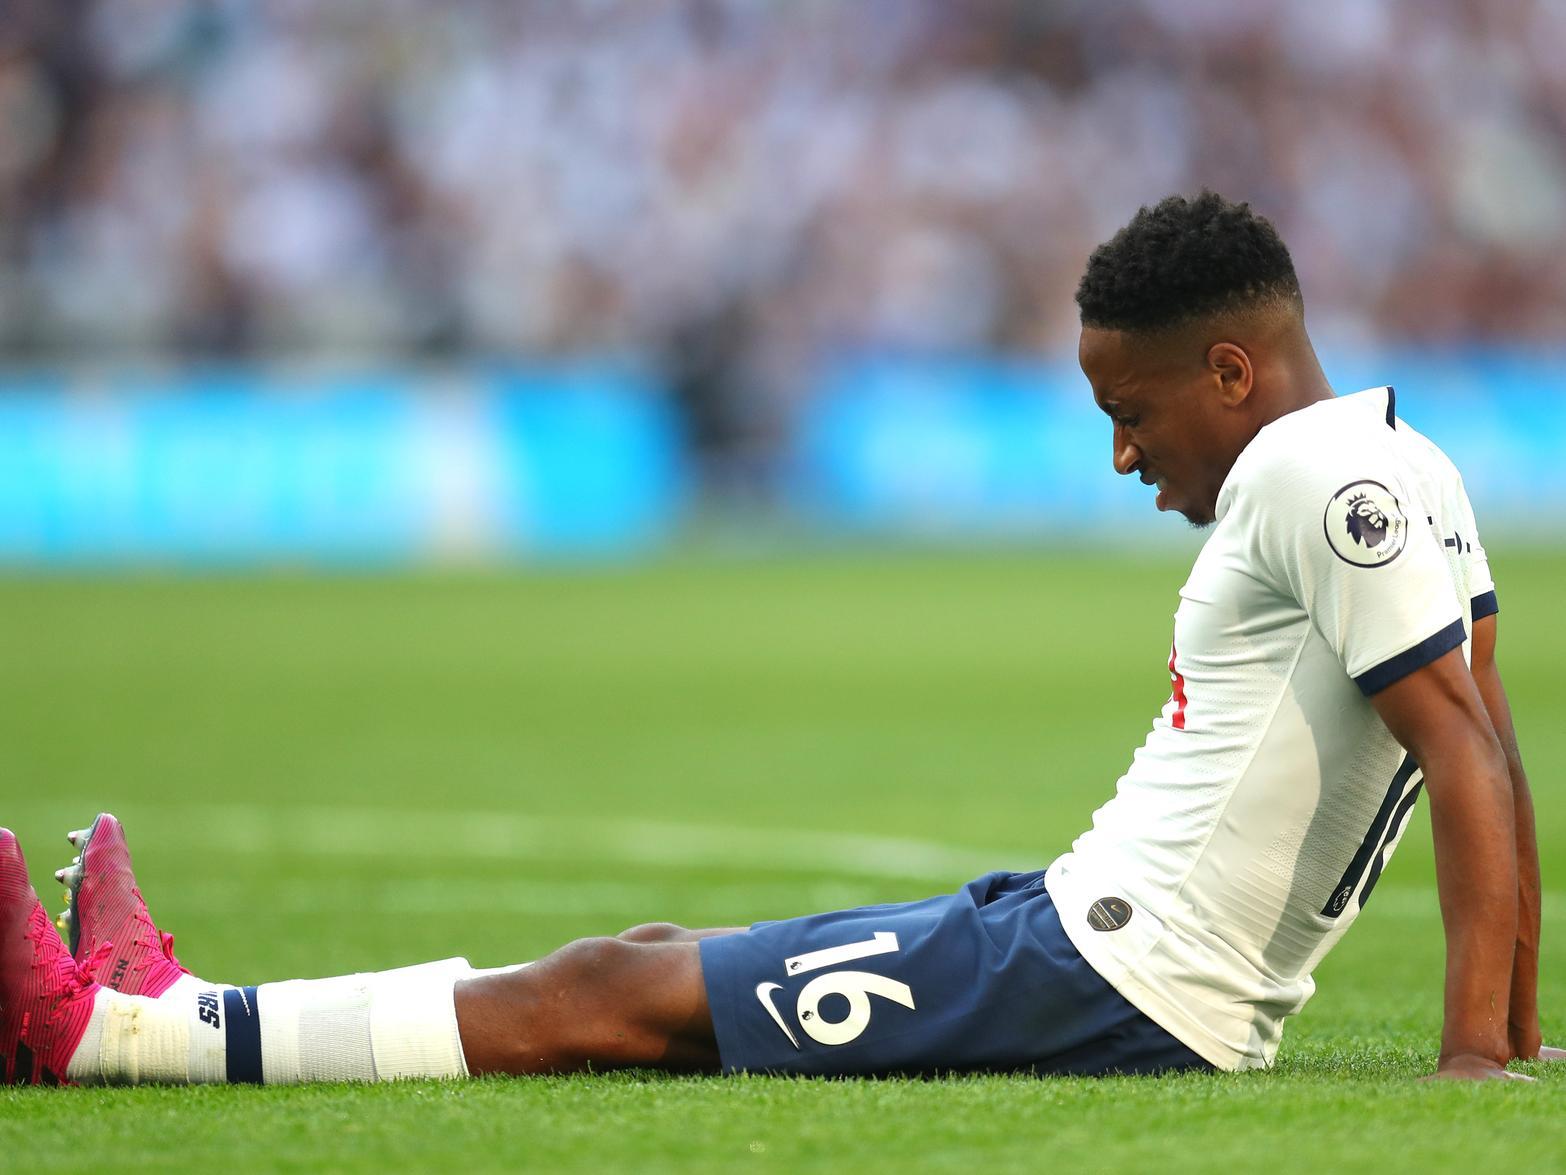 Bookies odds have reported Brighton & Hove Albion target Kyle Walker-Peters down as 1/10 to join Crystal Palace, while Brightons odds are as long as 12/1, perhaps hinting that the Seagulls will miss out to their rivals. (Sky Bet)